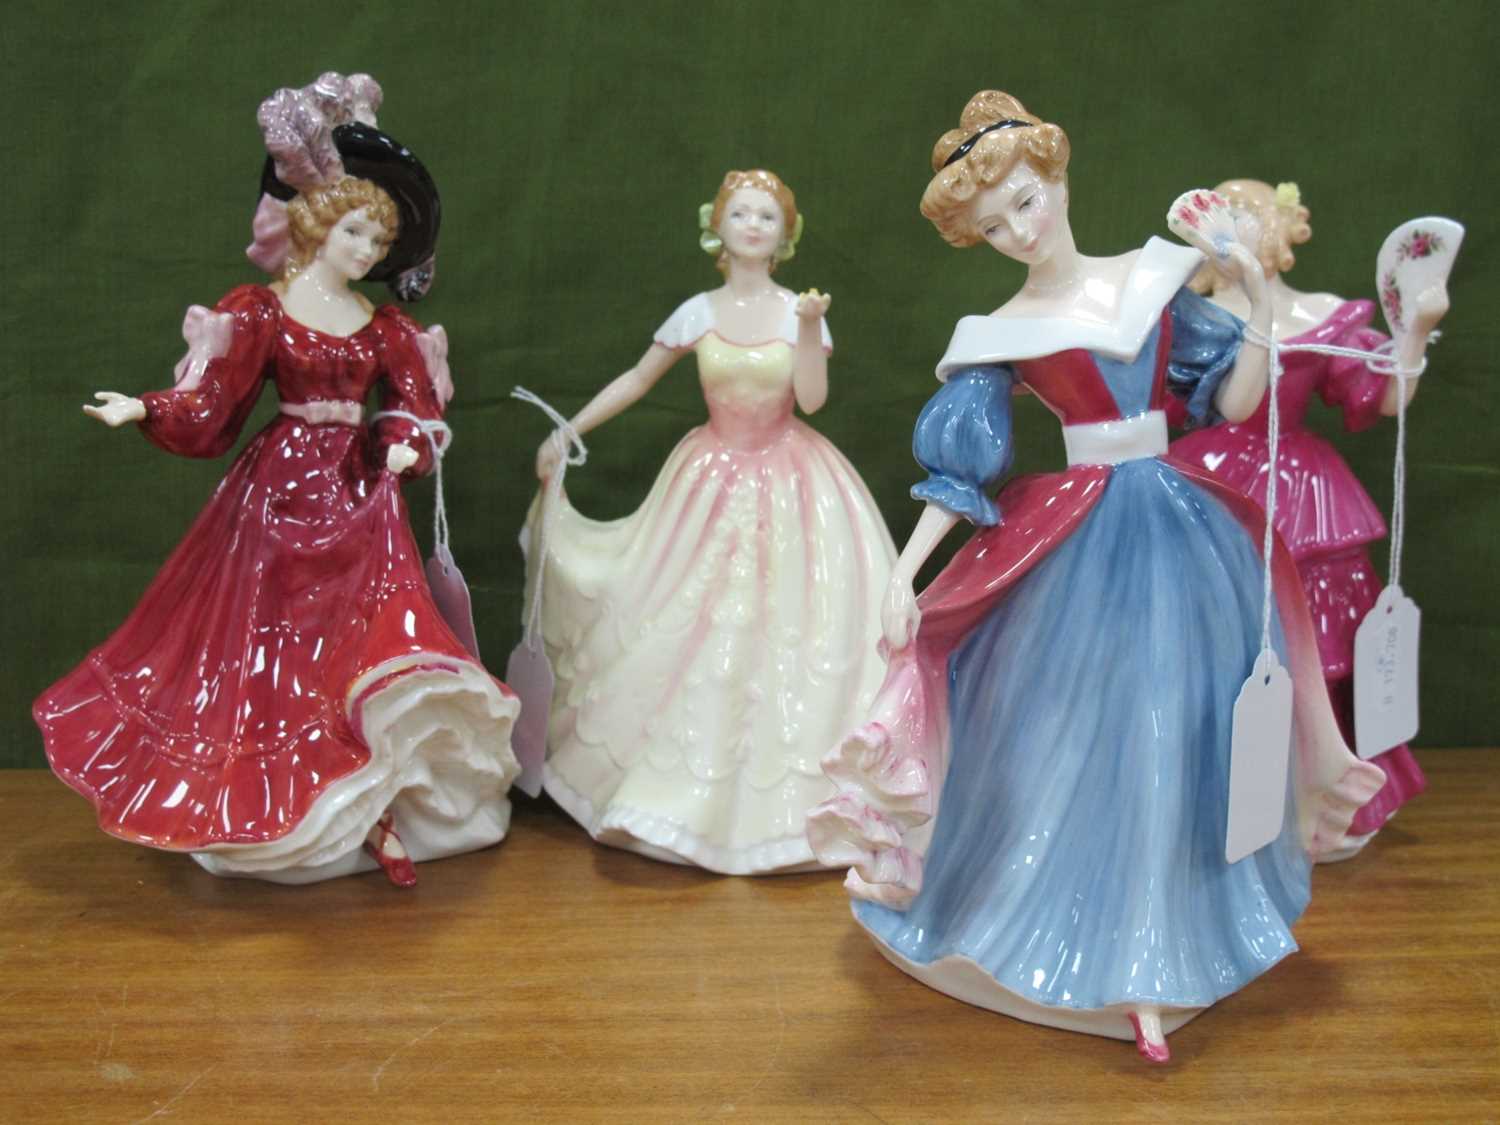 Royal Doulton Figure of the Year 'Deborah', 18.5cm high, 'Patricia, 'Jennifer' and 'Amy', each